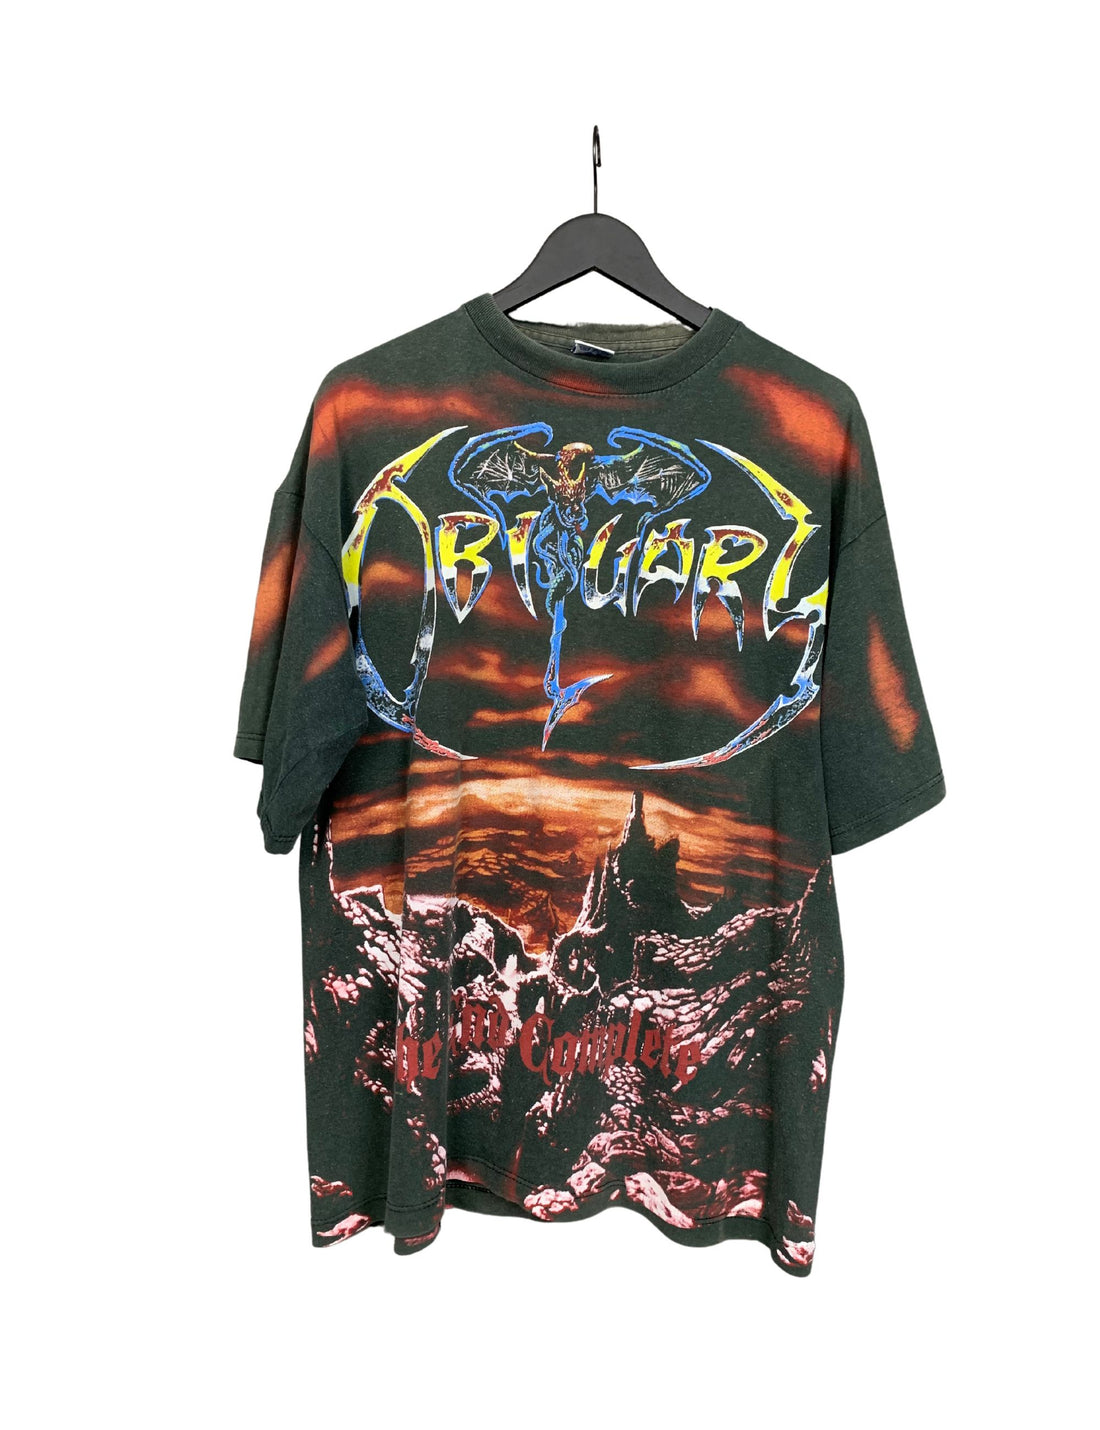 Obituary 1993 The End Complete Vintage T-Shirt